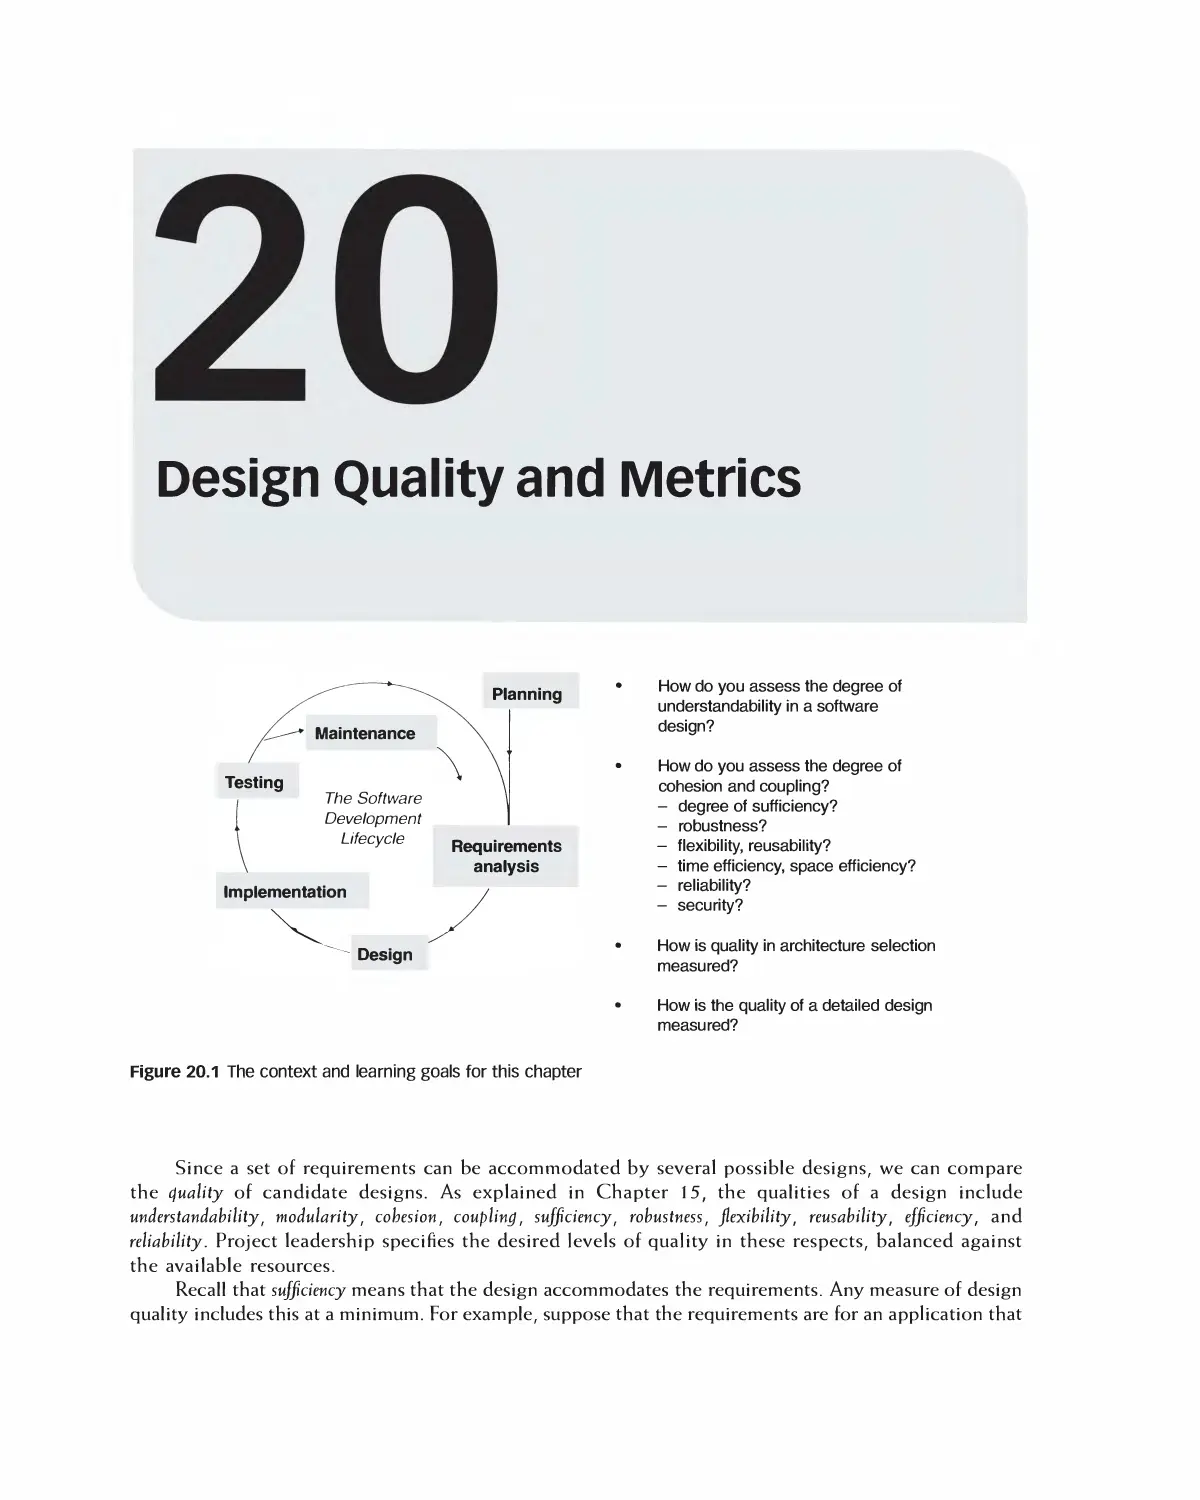 Chapter 20: Design Quality and Metrics